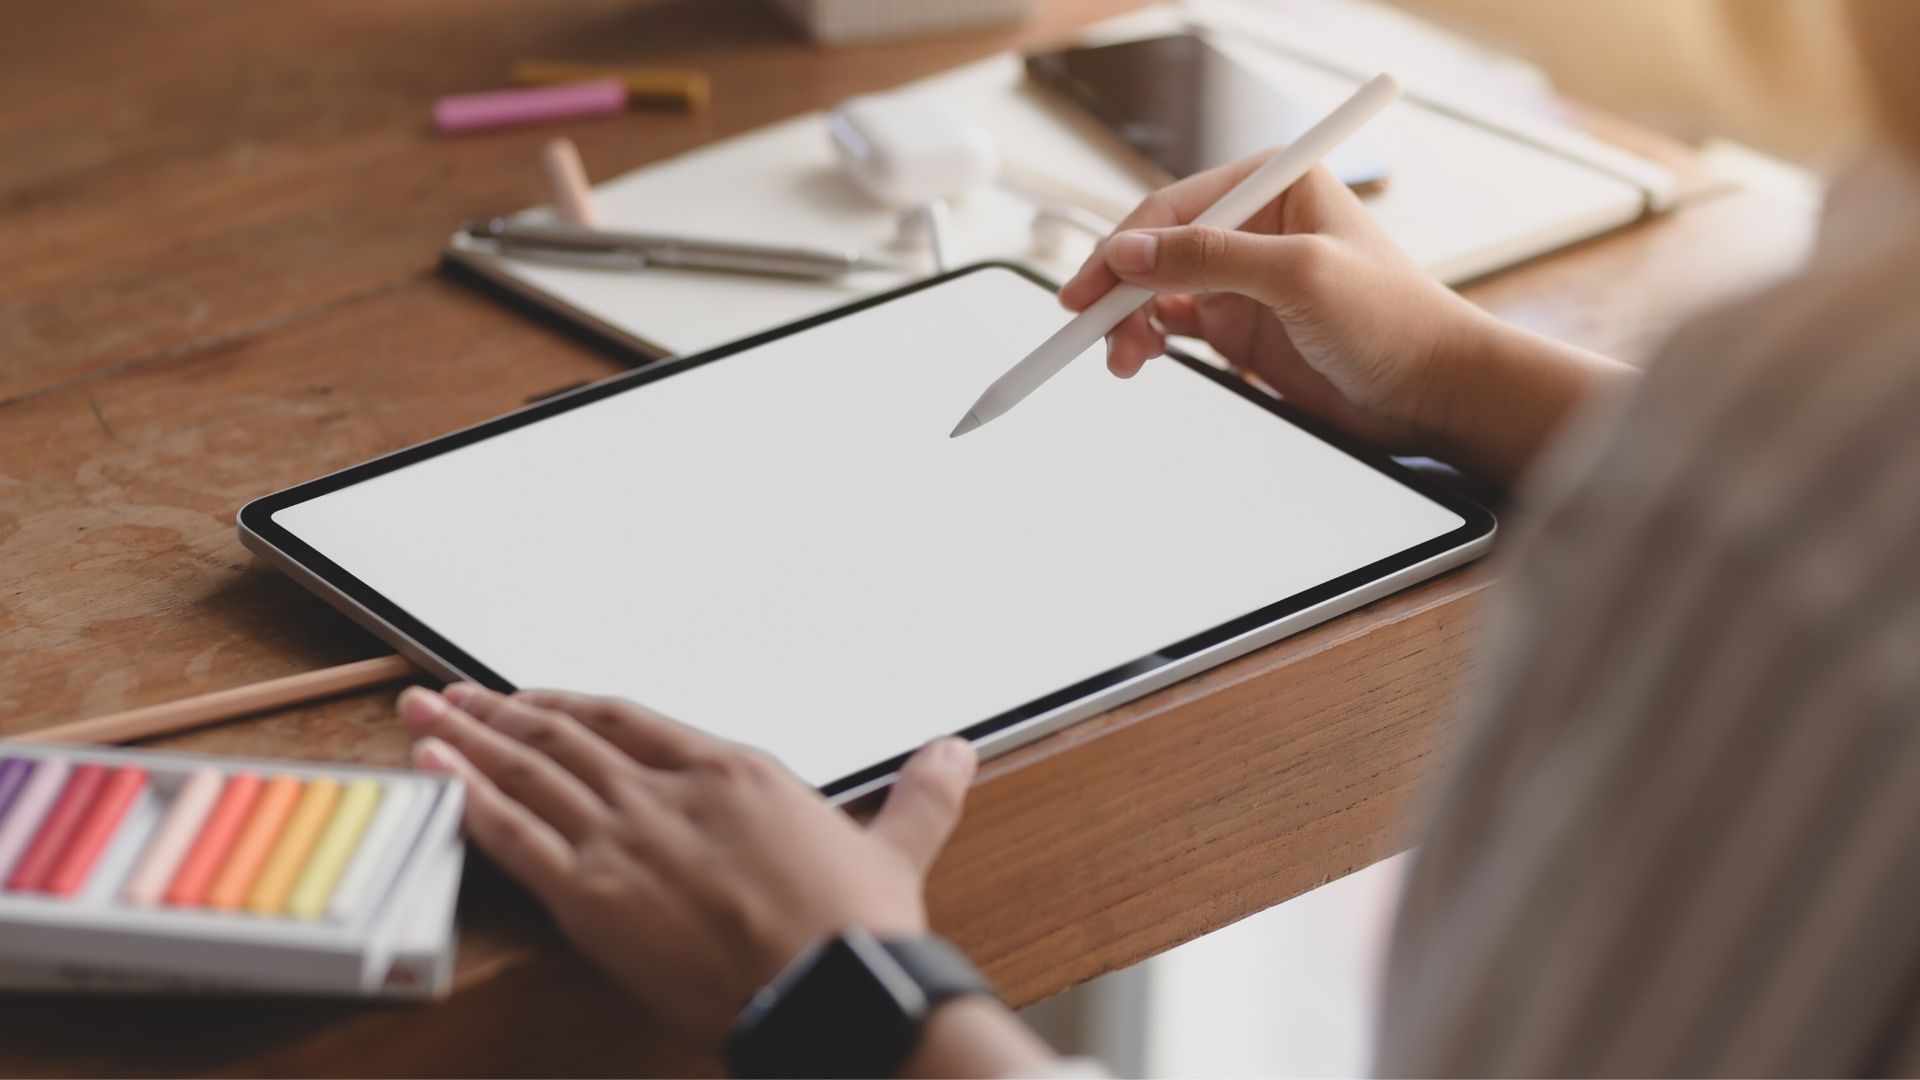 Top 7 Best Drawing Apps for Android Devices to Use in 2020